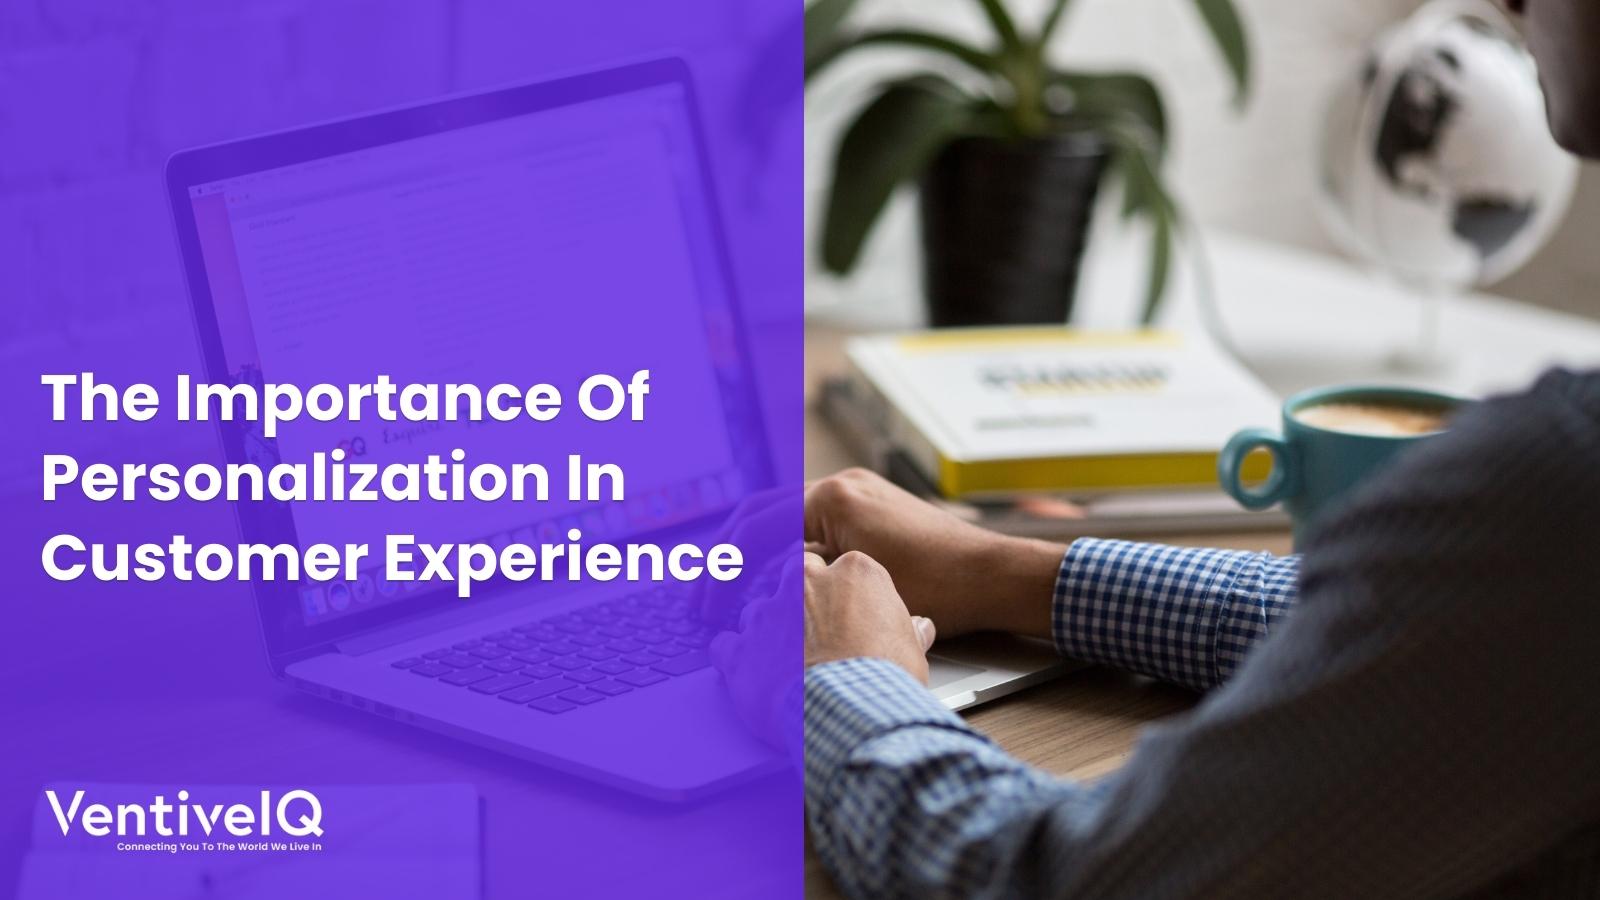 The importance of personalization in customer experience